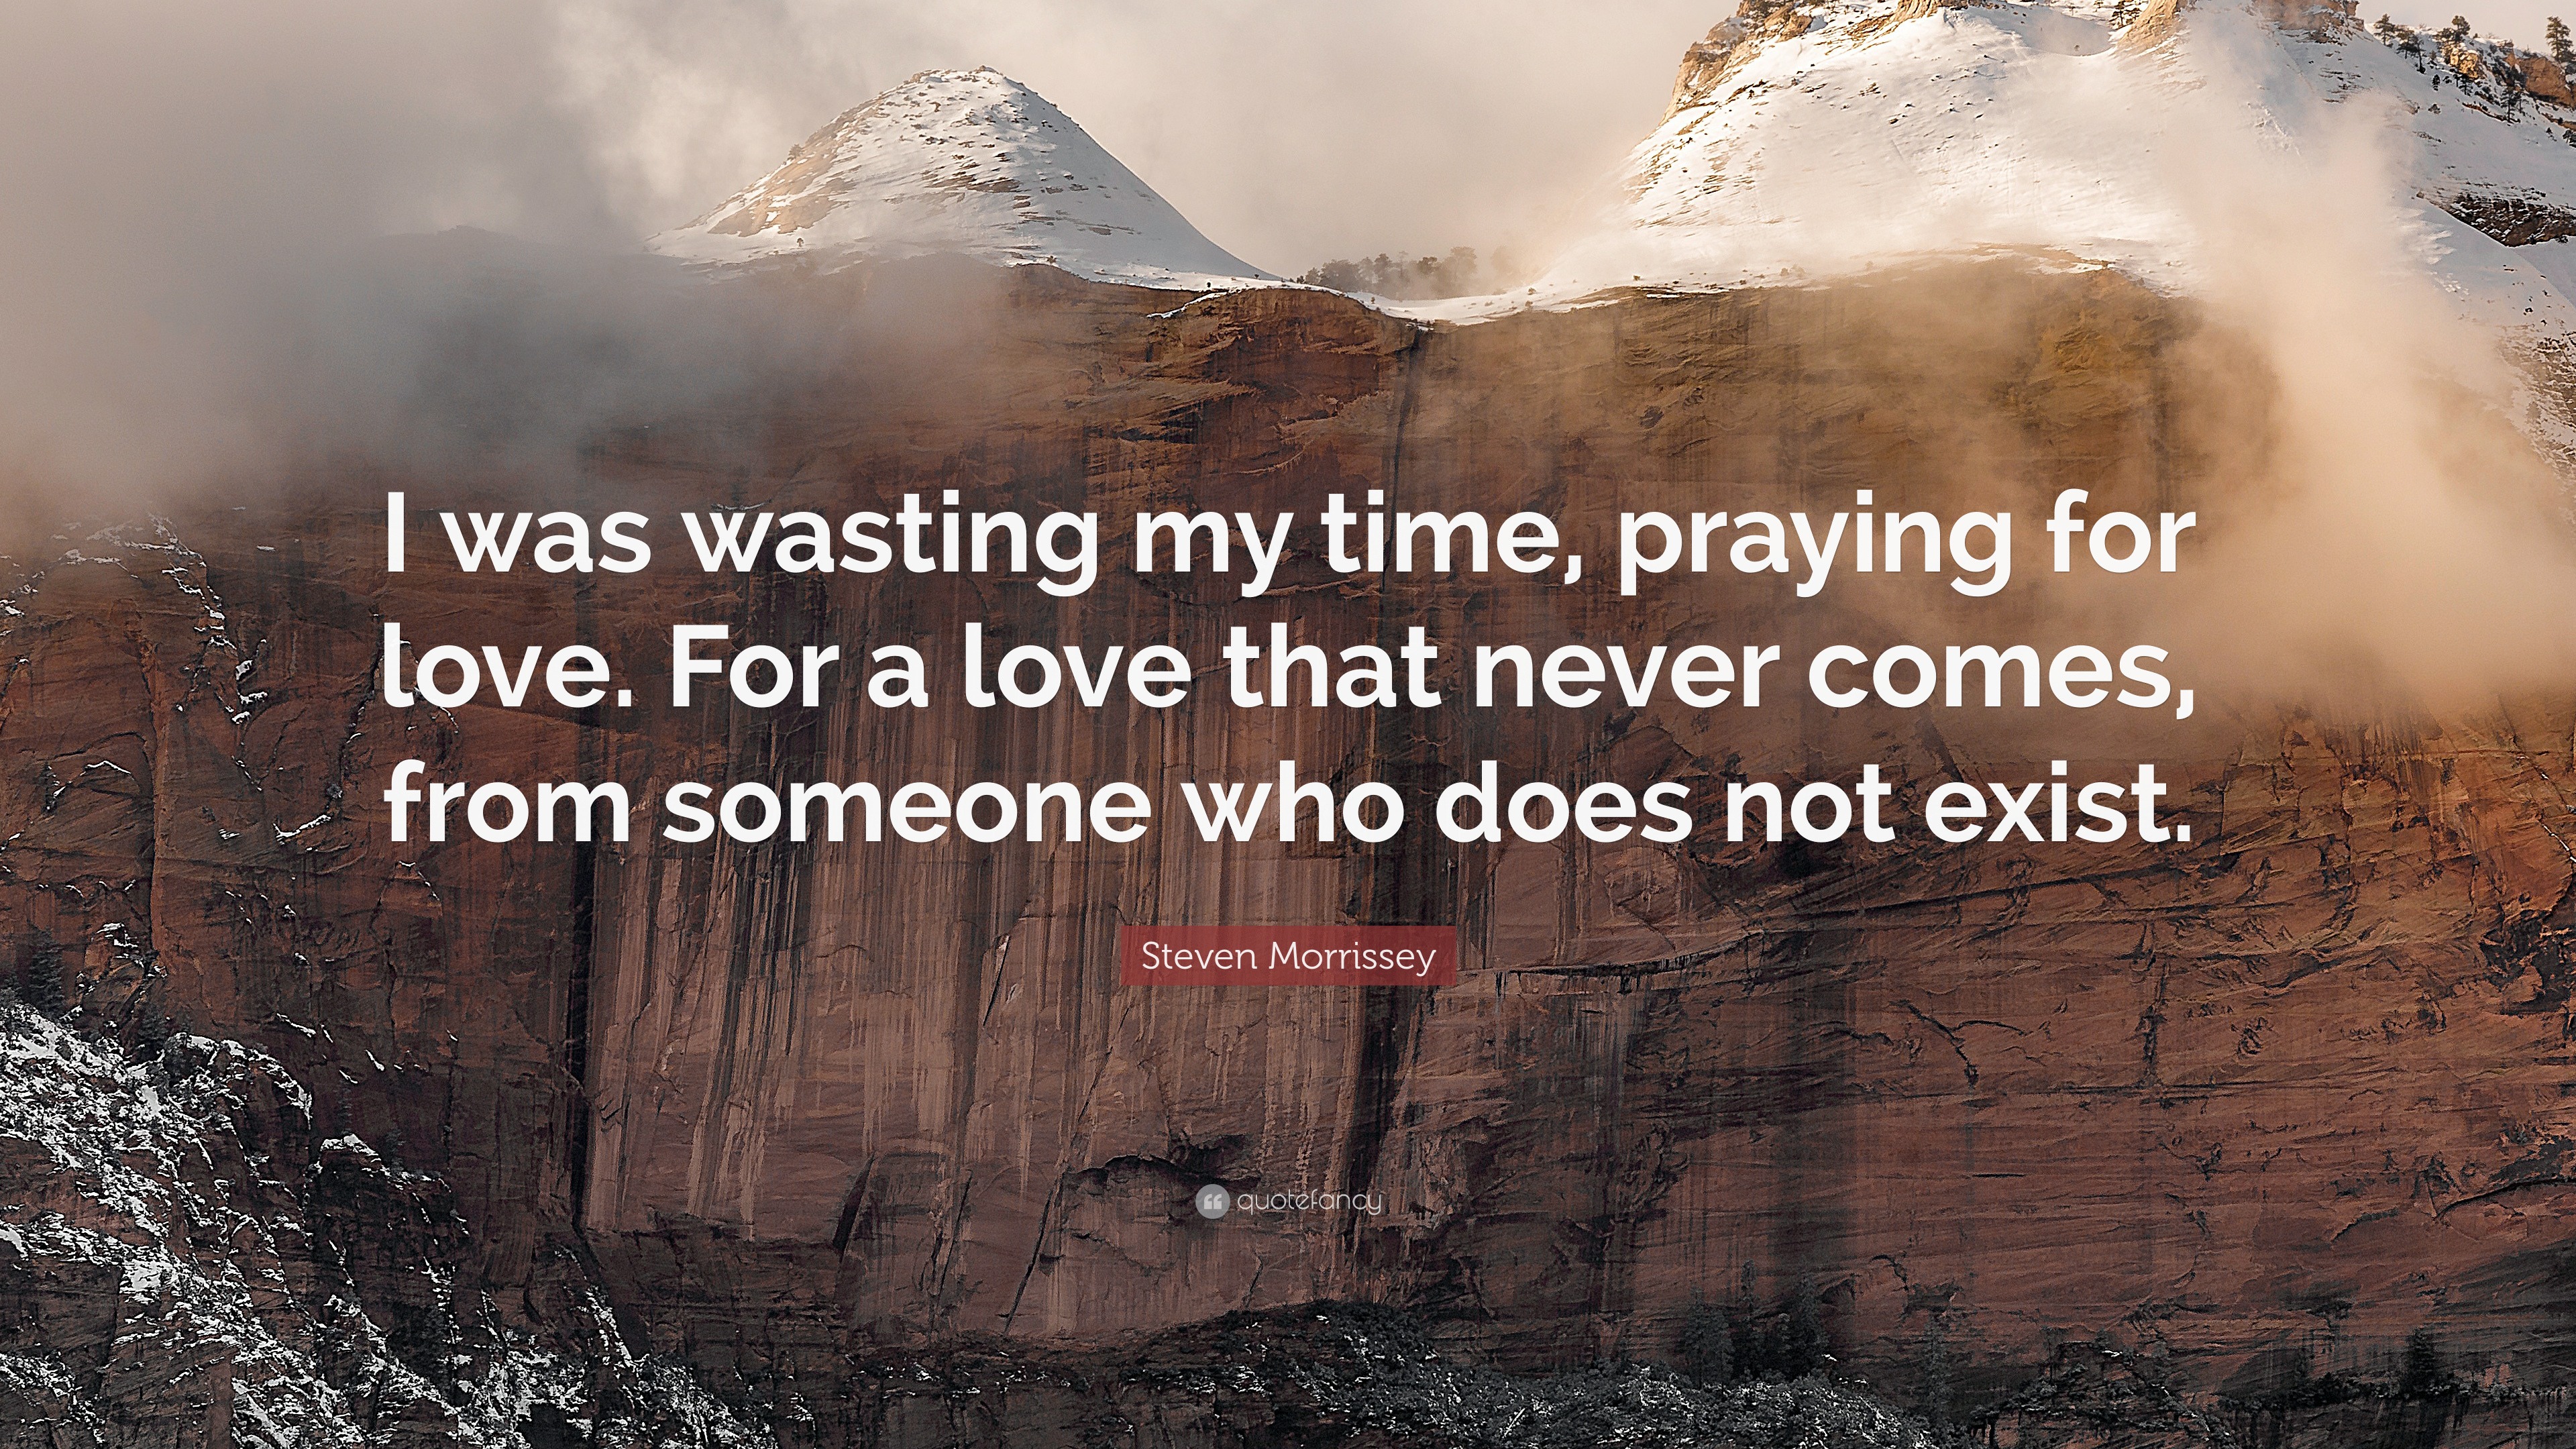 Steven Morrissey Quote “I was wasting my time praying for love For